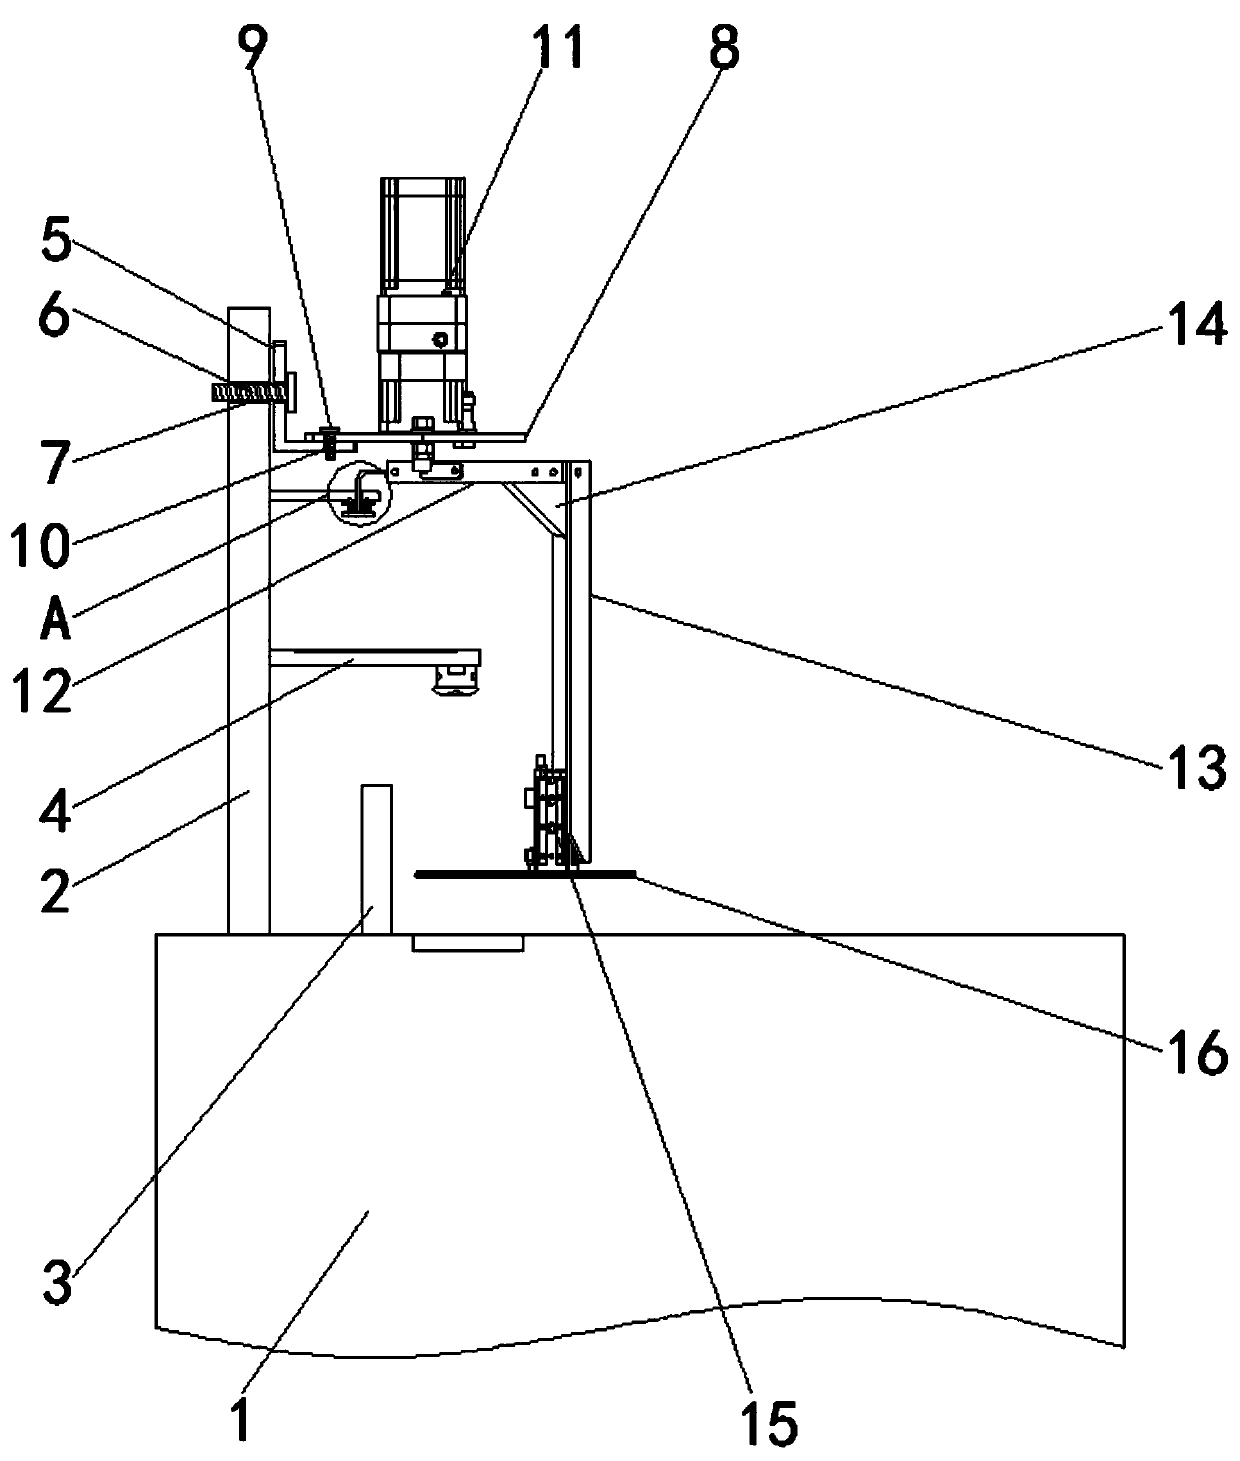 Rotating device for sewing hemming